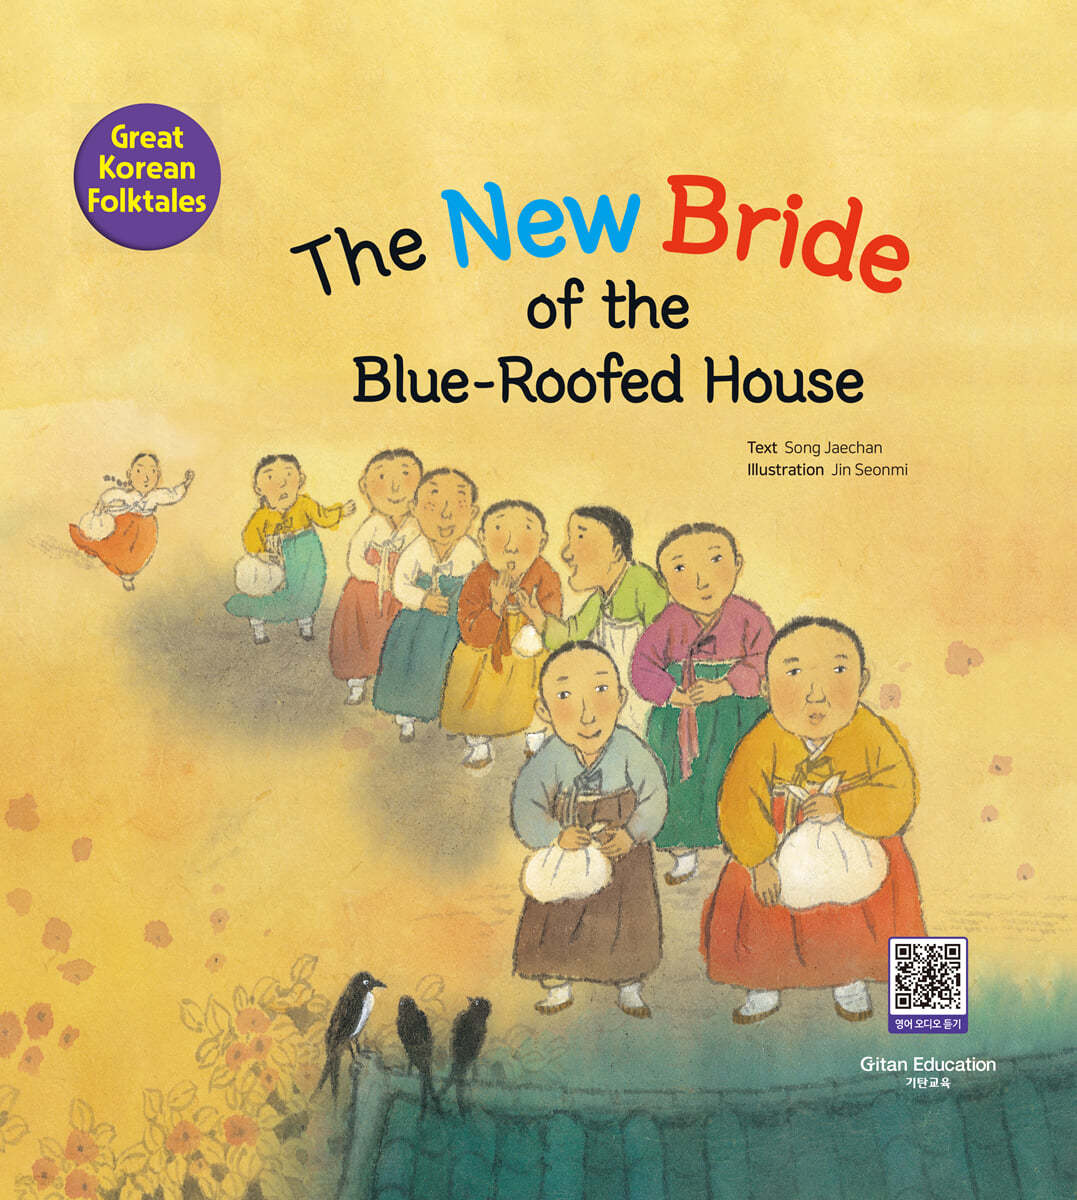 The New Bride of the Blue-Roofed House